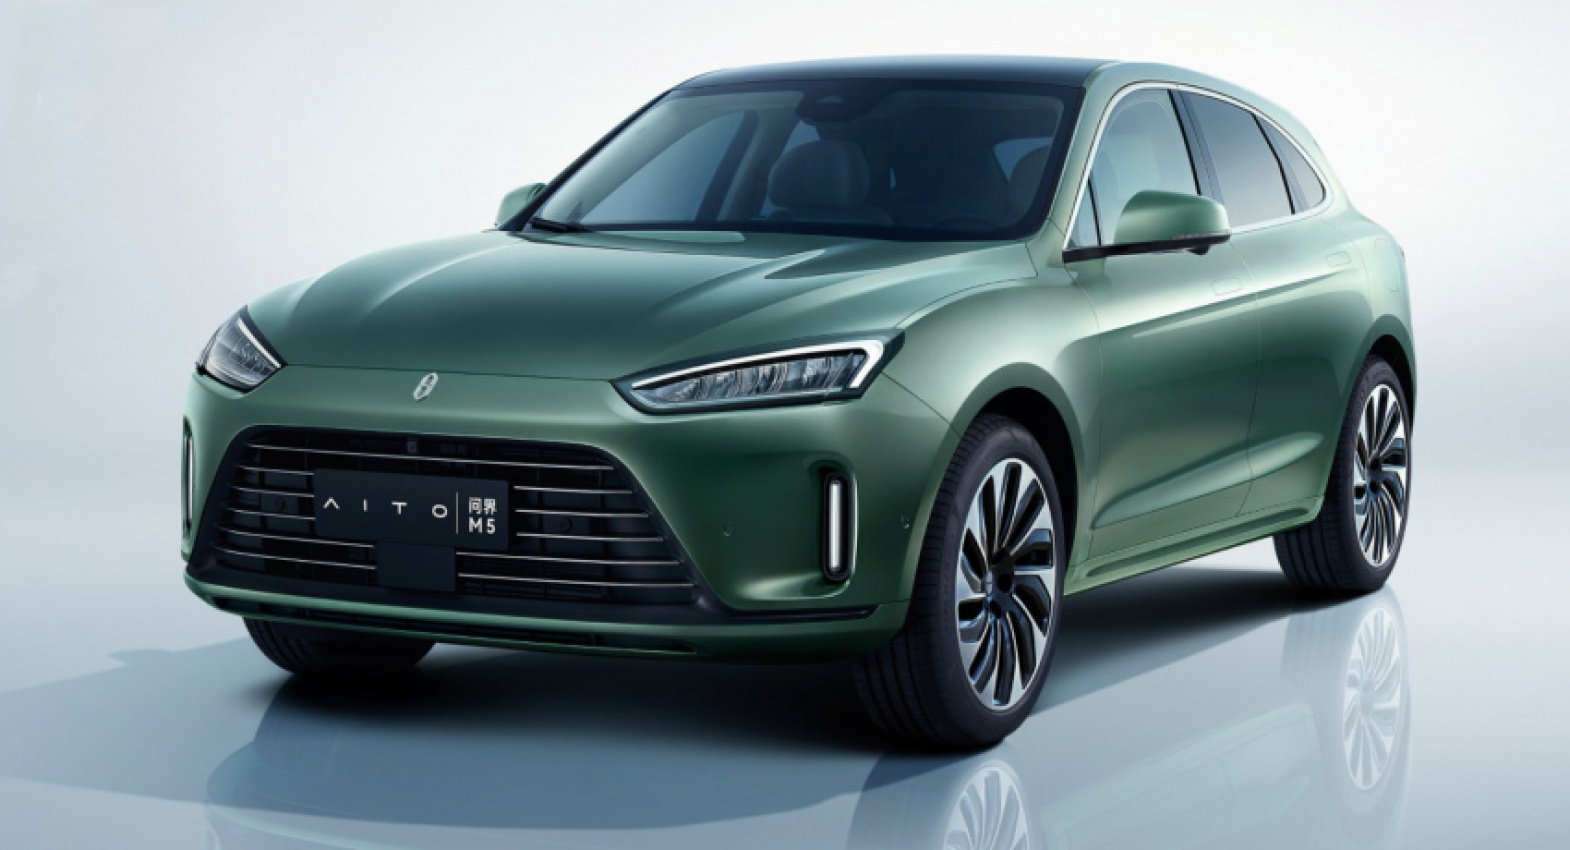 autos, cars, huawei, news, china, hybrids, new cars, phev, aito m5 phev suv launched in china with huawei tech and range-extender ice